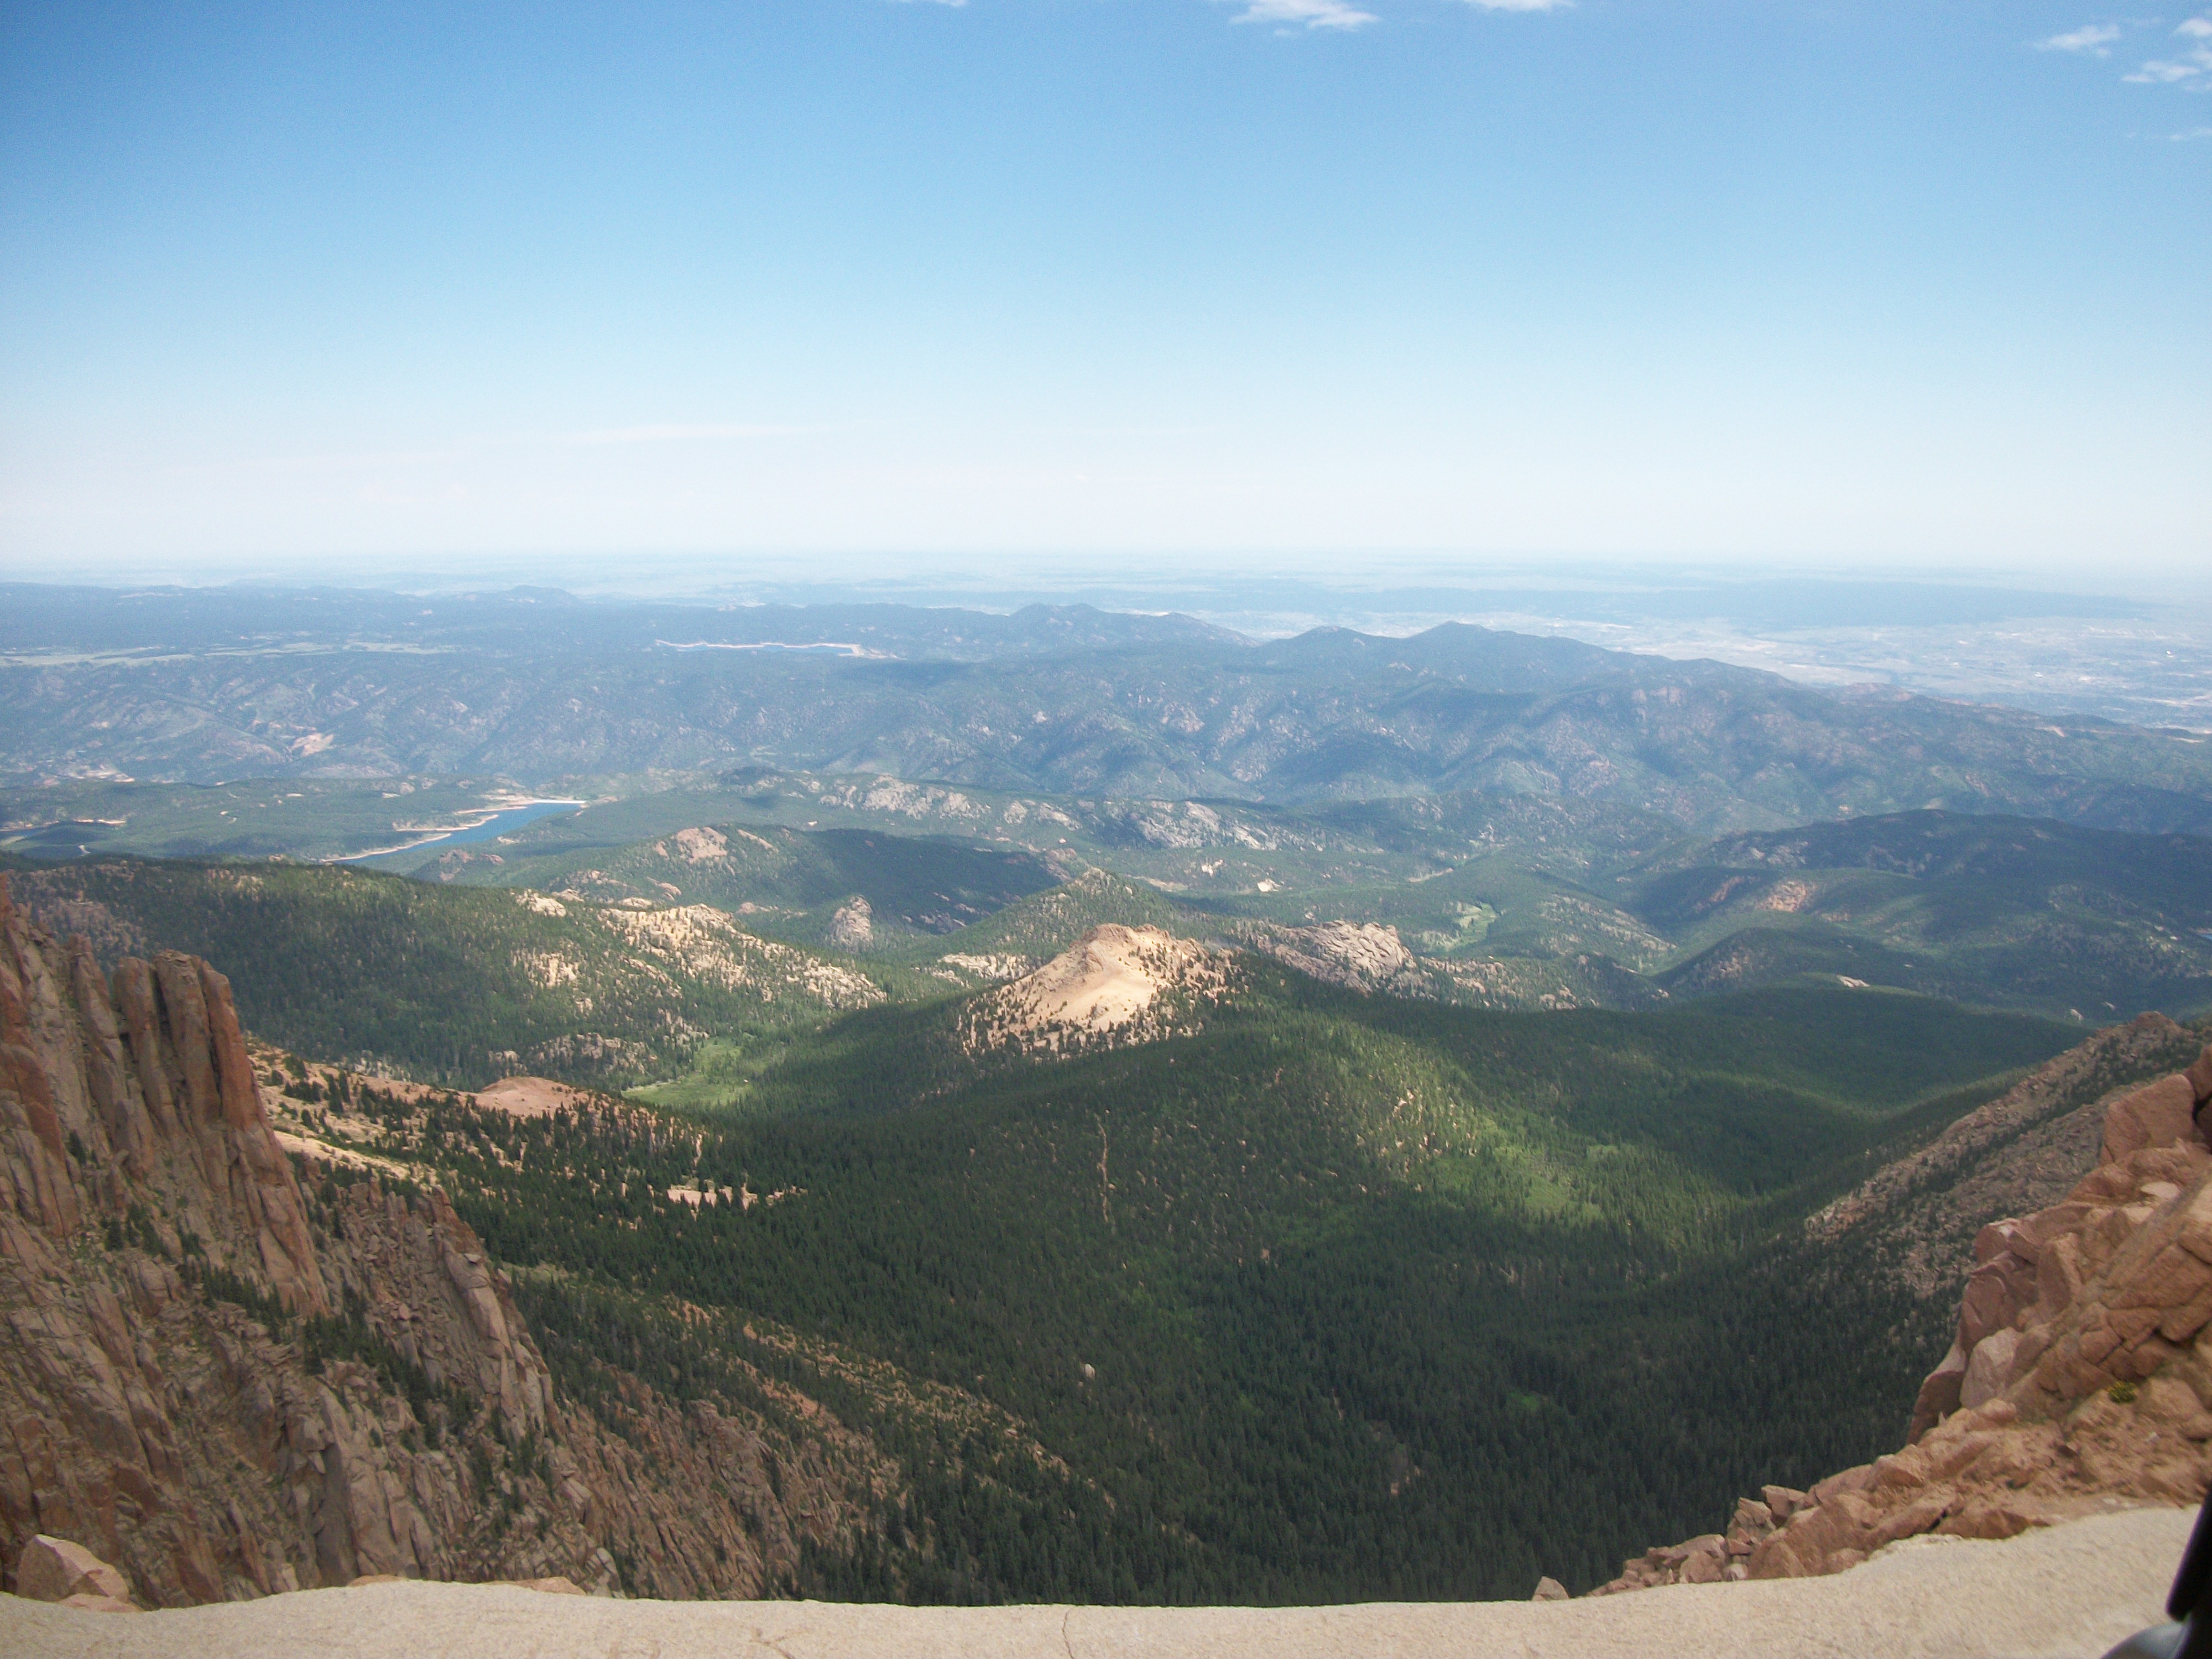 From the top of Pikes Peak